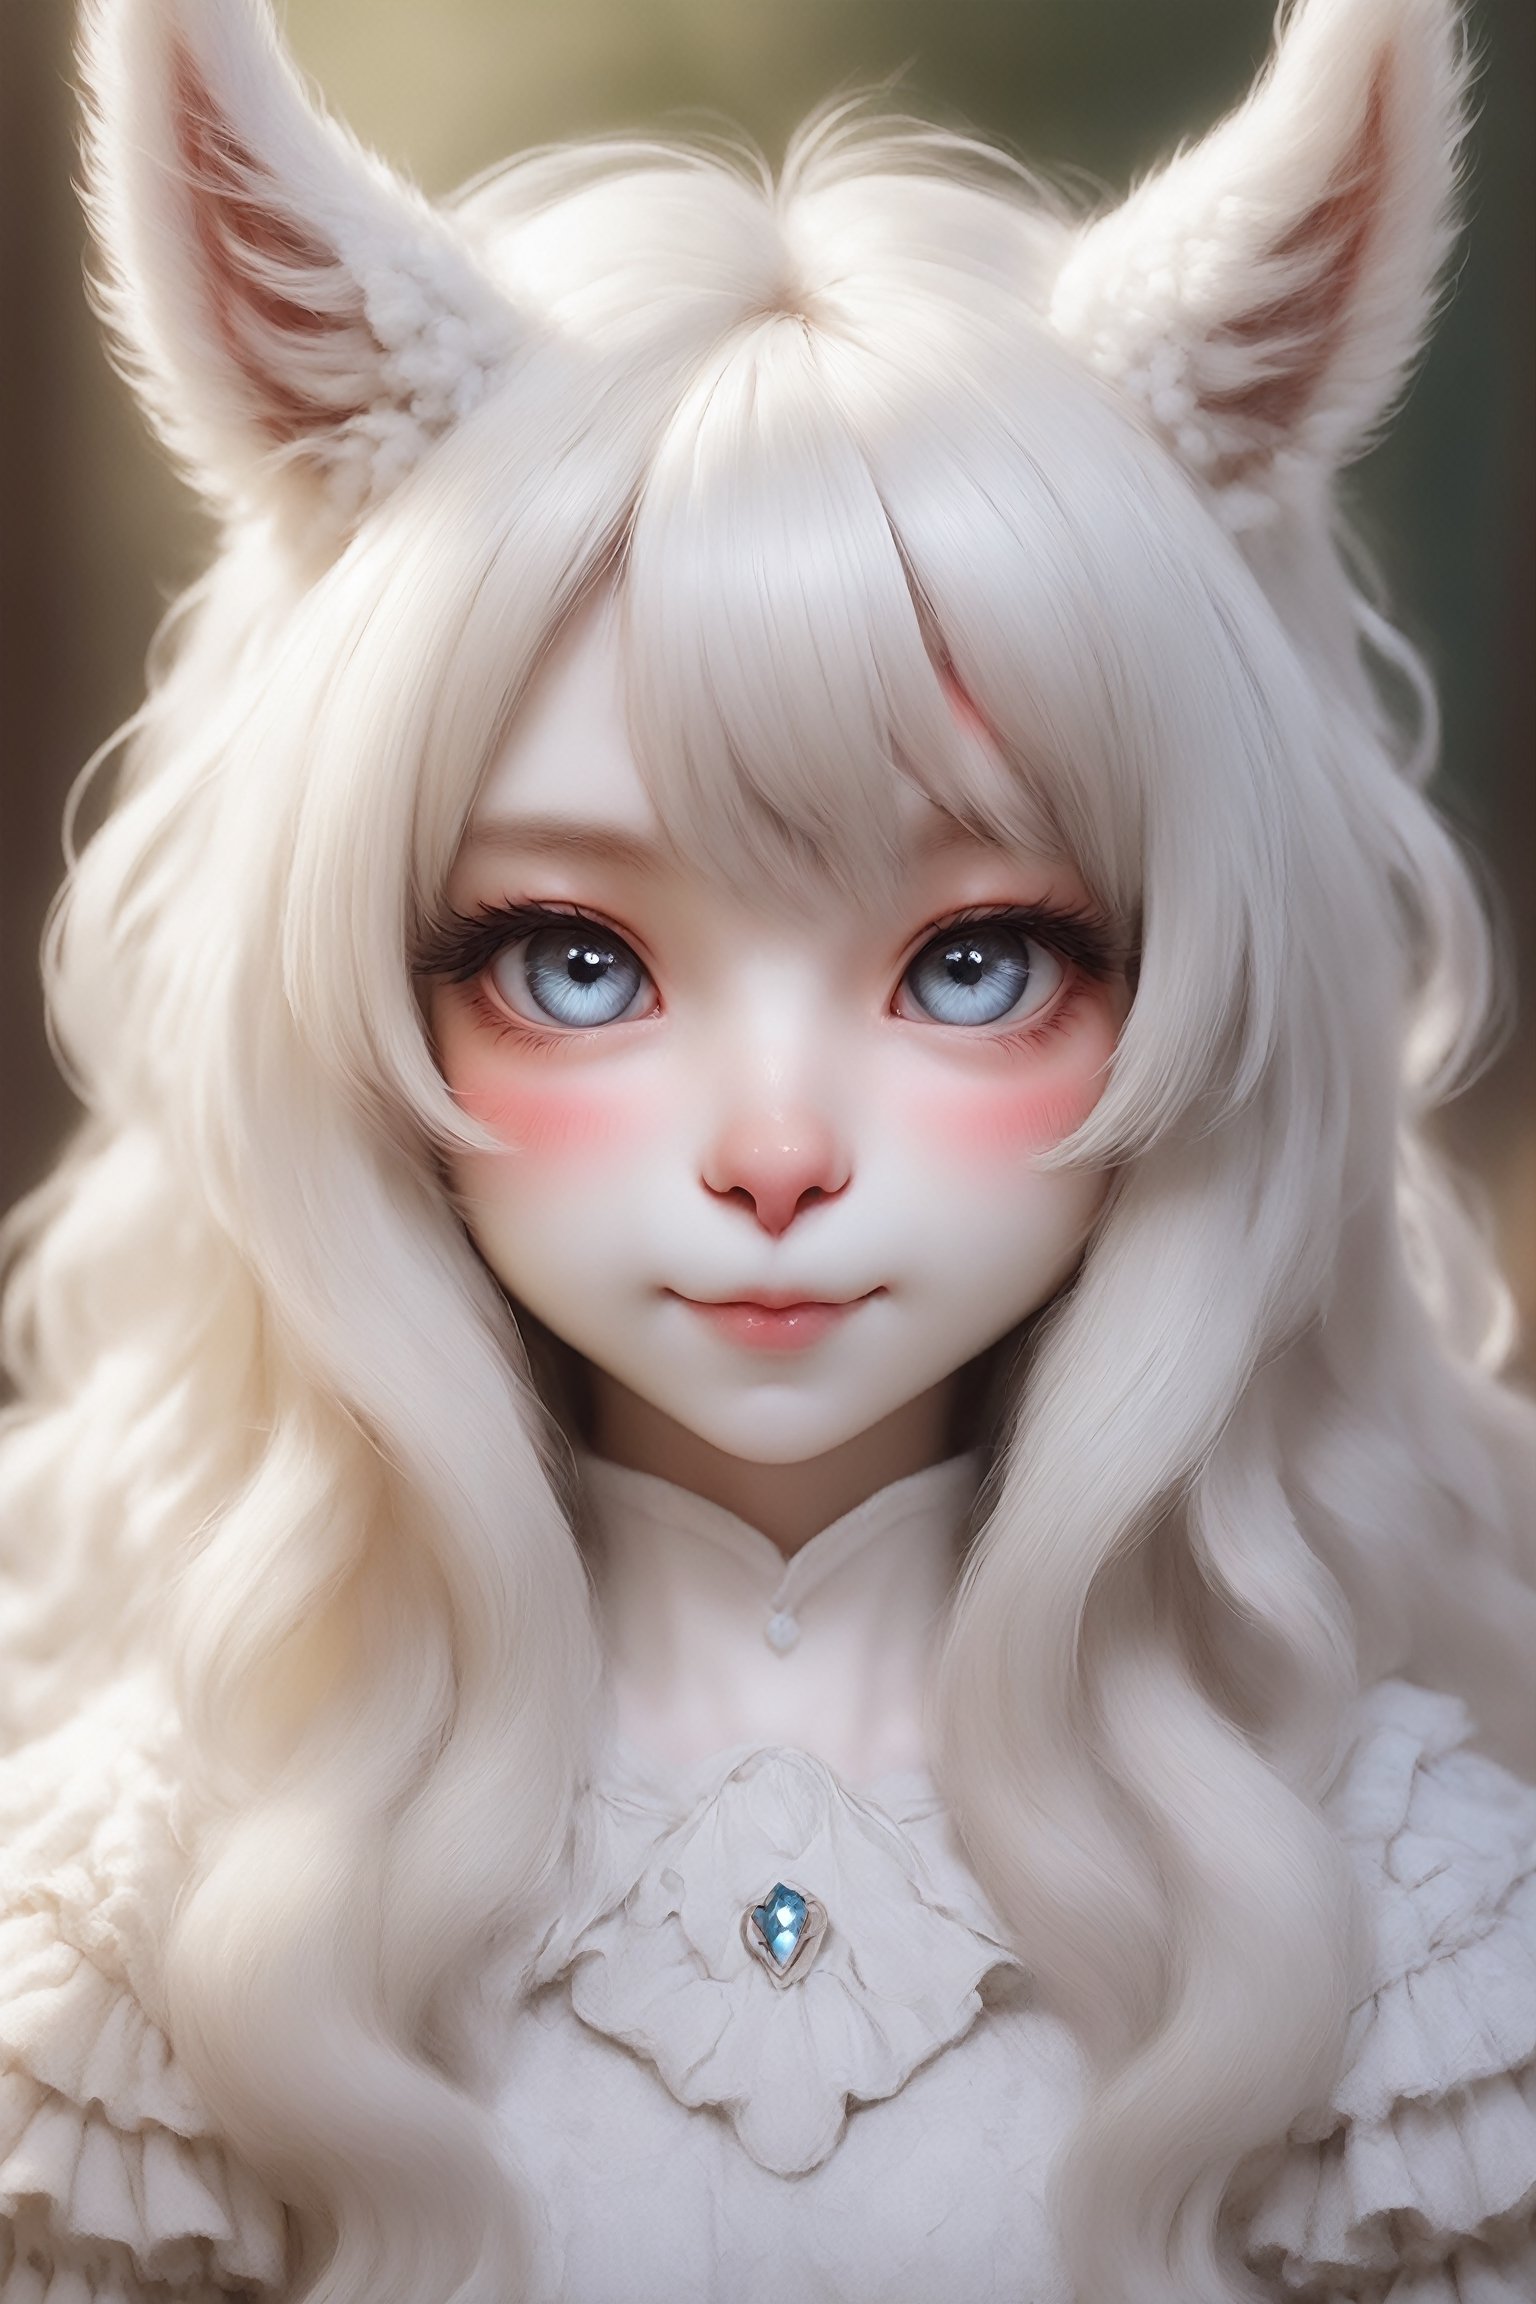  alpaca girl,((anthropomorphic alpaca girl)), with soft, fluffy hair in a beautiful shade of white, large expressive eyes and long eyelashes, and ears on her head that resemble those of an alpaca. She is playful, kind, and exudes an aura of calm. Anthro,anthro,knight,photo r3al,photo,yoomin